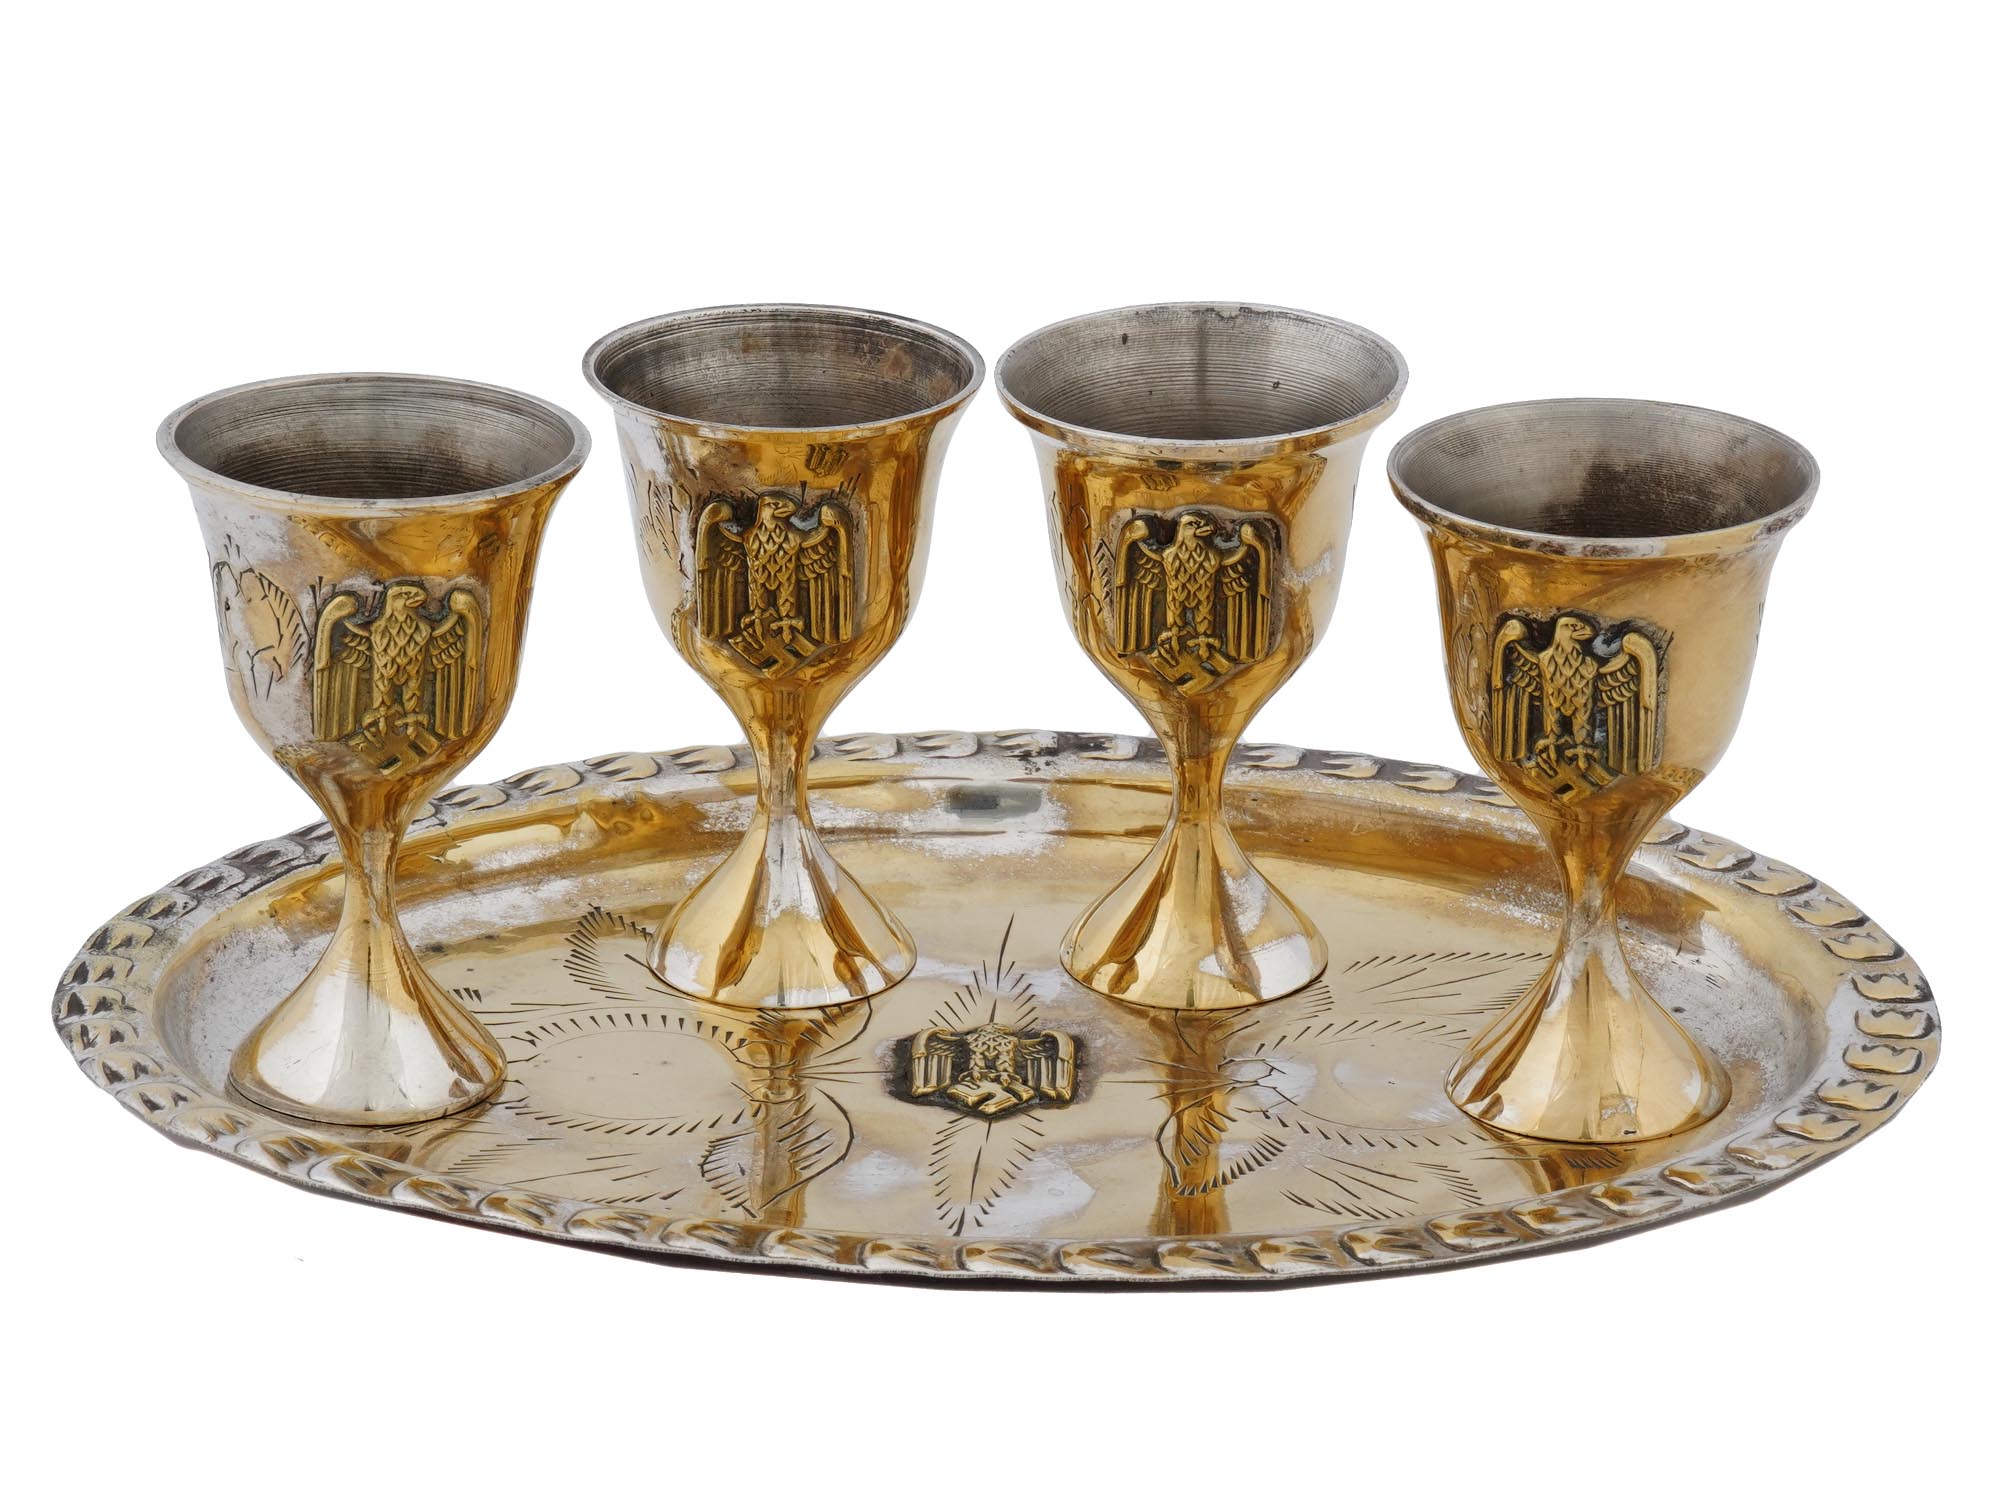 WWII NAZI GERMAN GILT BRASS GOBLETS AND SERVING TRAY PIC-0